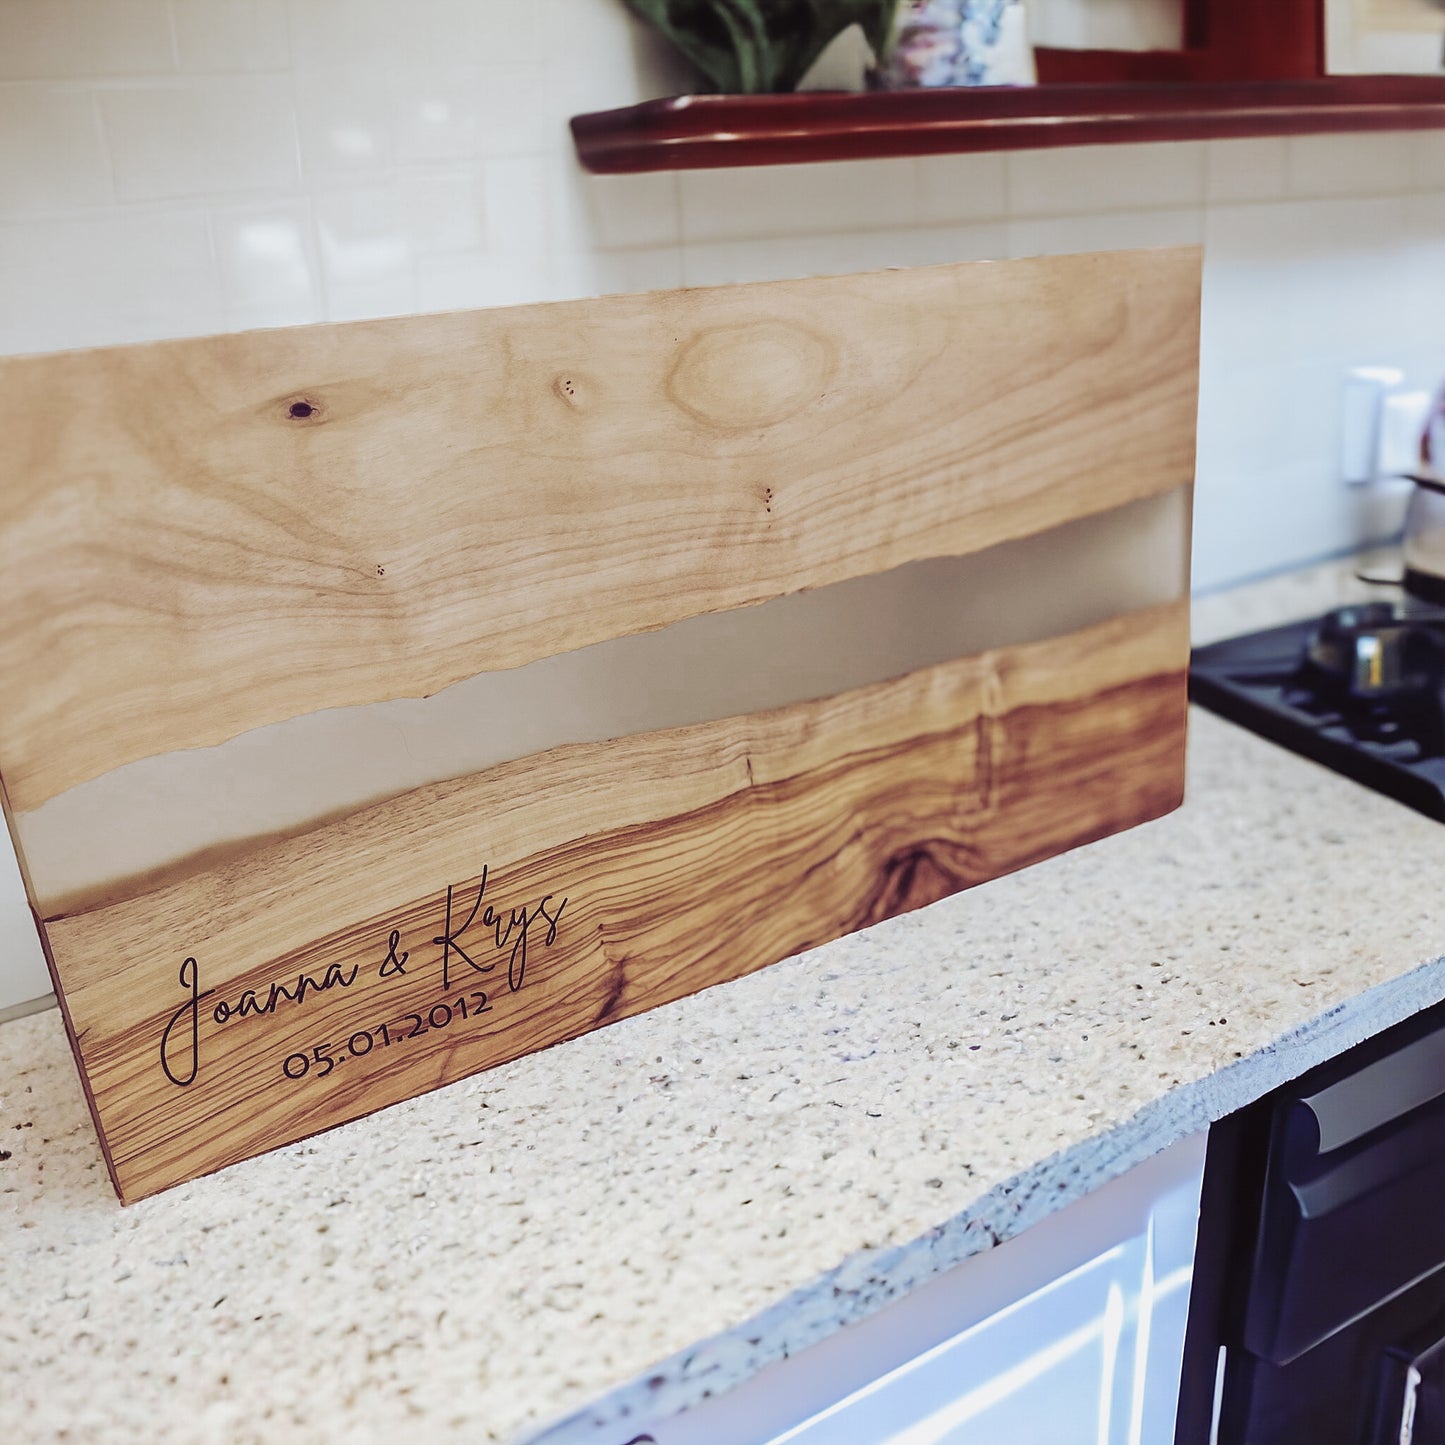 OLIVE WOOD CUTTING BOARD WITH RIVER OF CLEAR RESIN